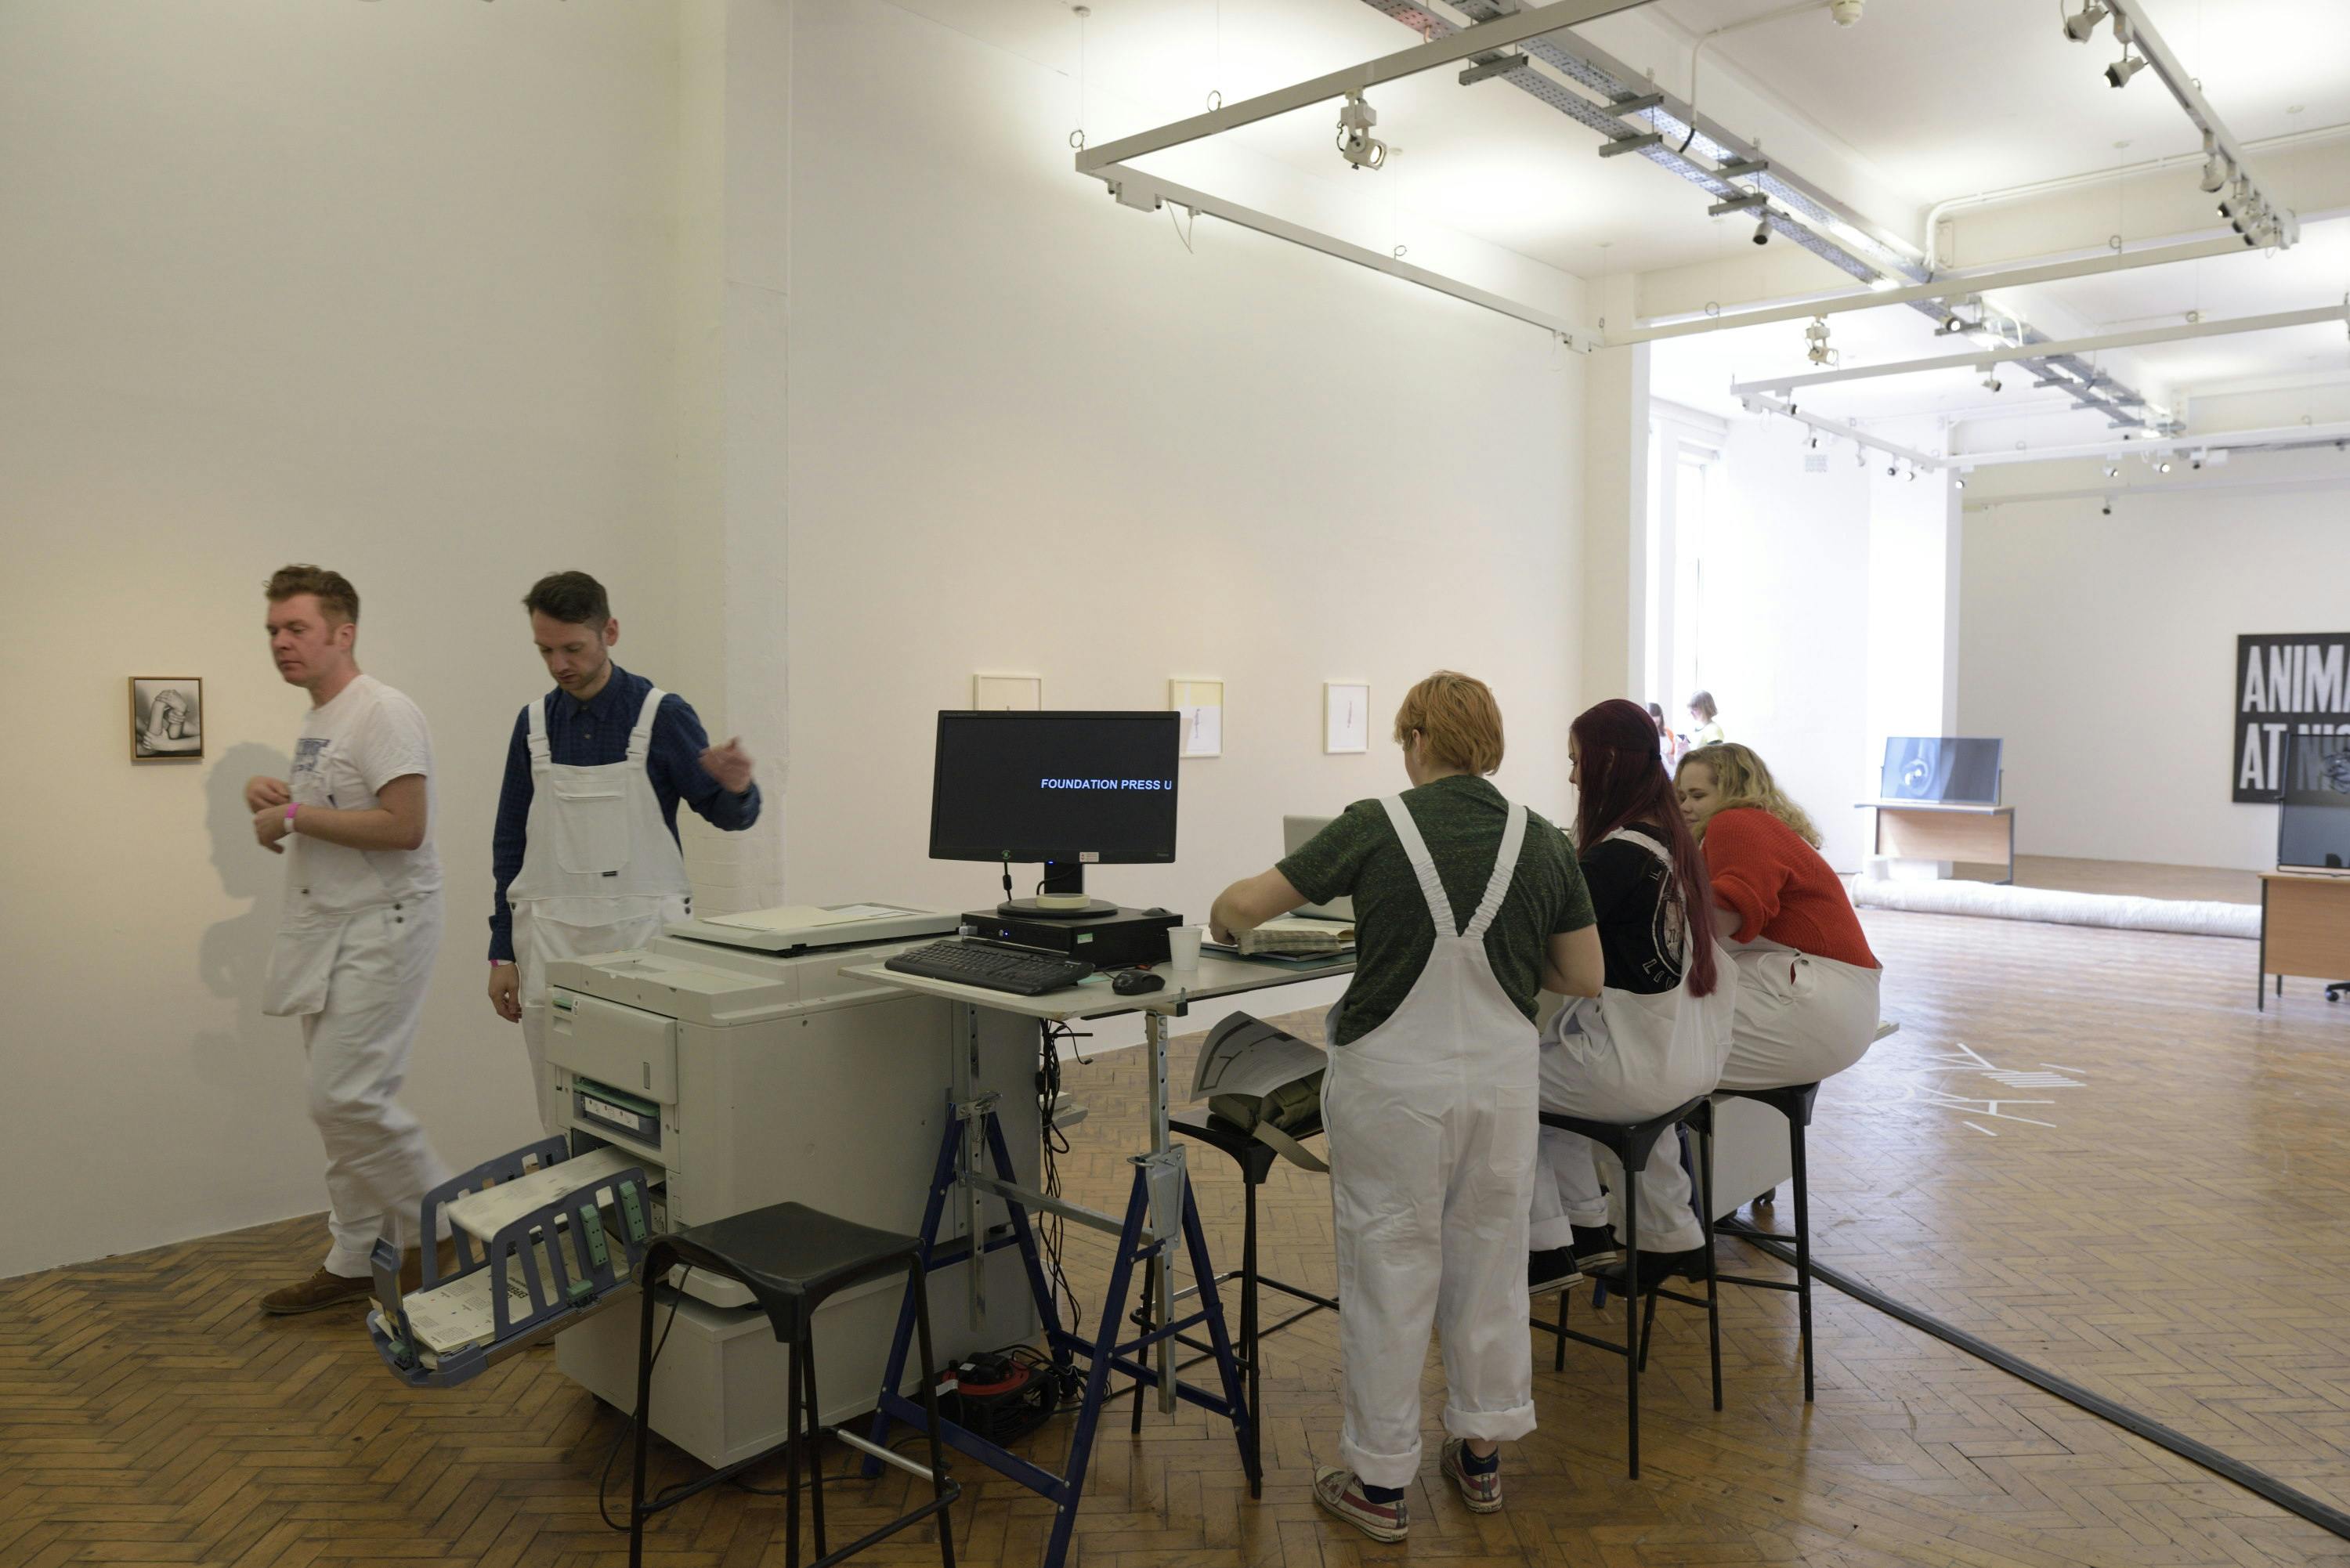 A workshop is taking place in the gallery. A group of students dressed in white uniforms surround a printer. 